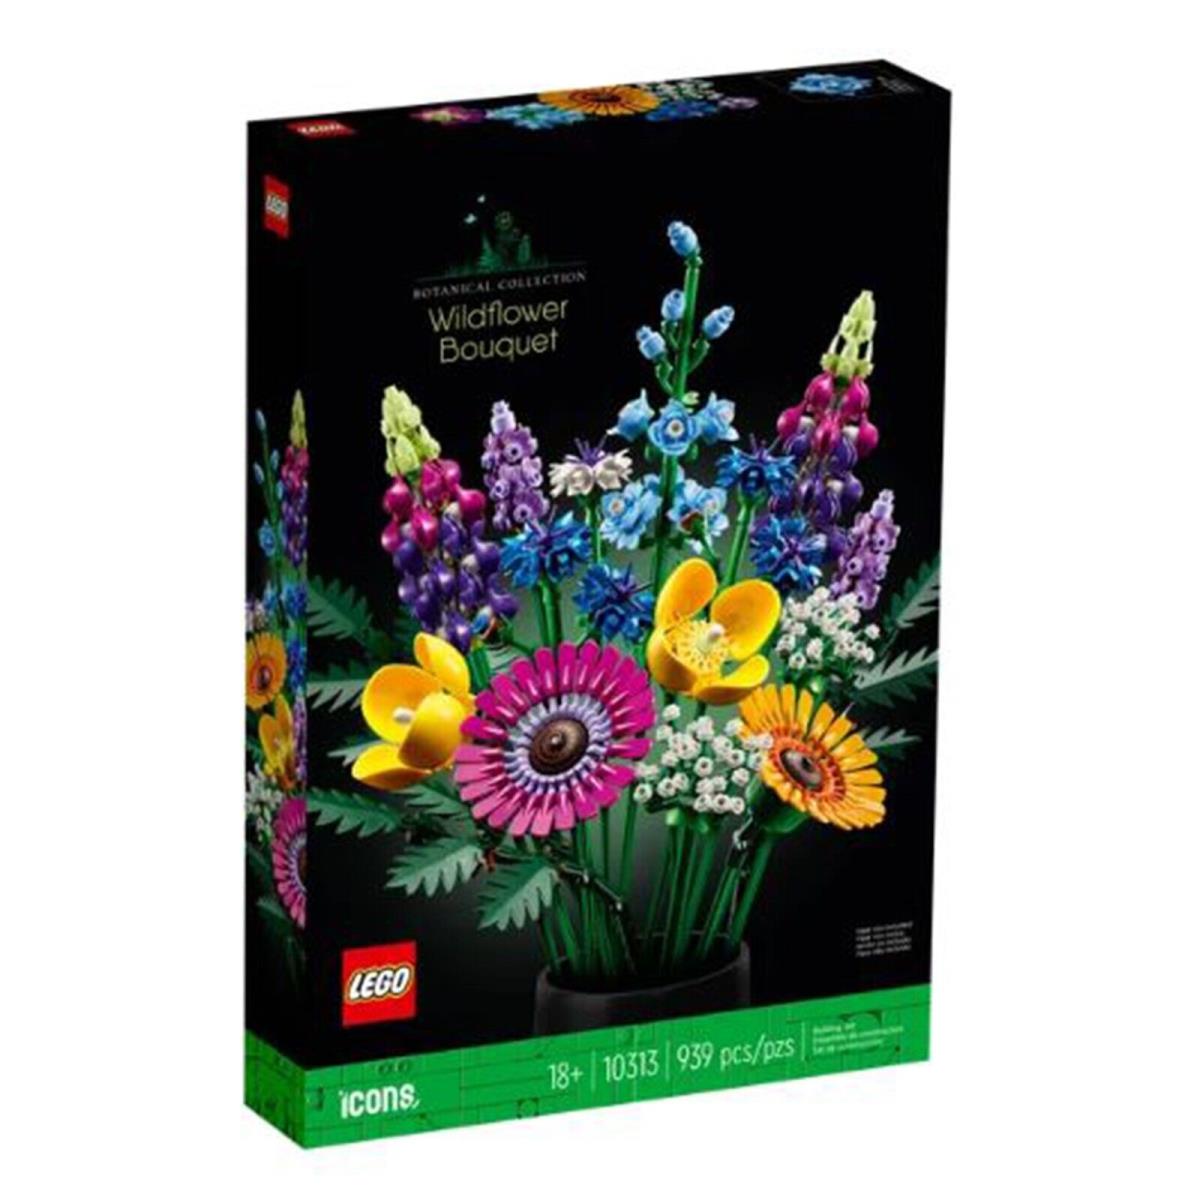 Lego Botanical Collection Wildflower Bouquet Building Set 10313 IN Stock